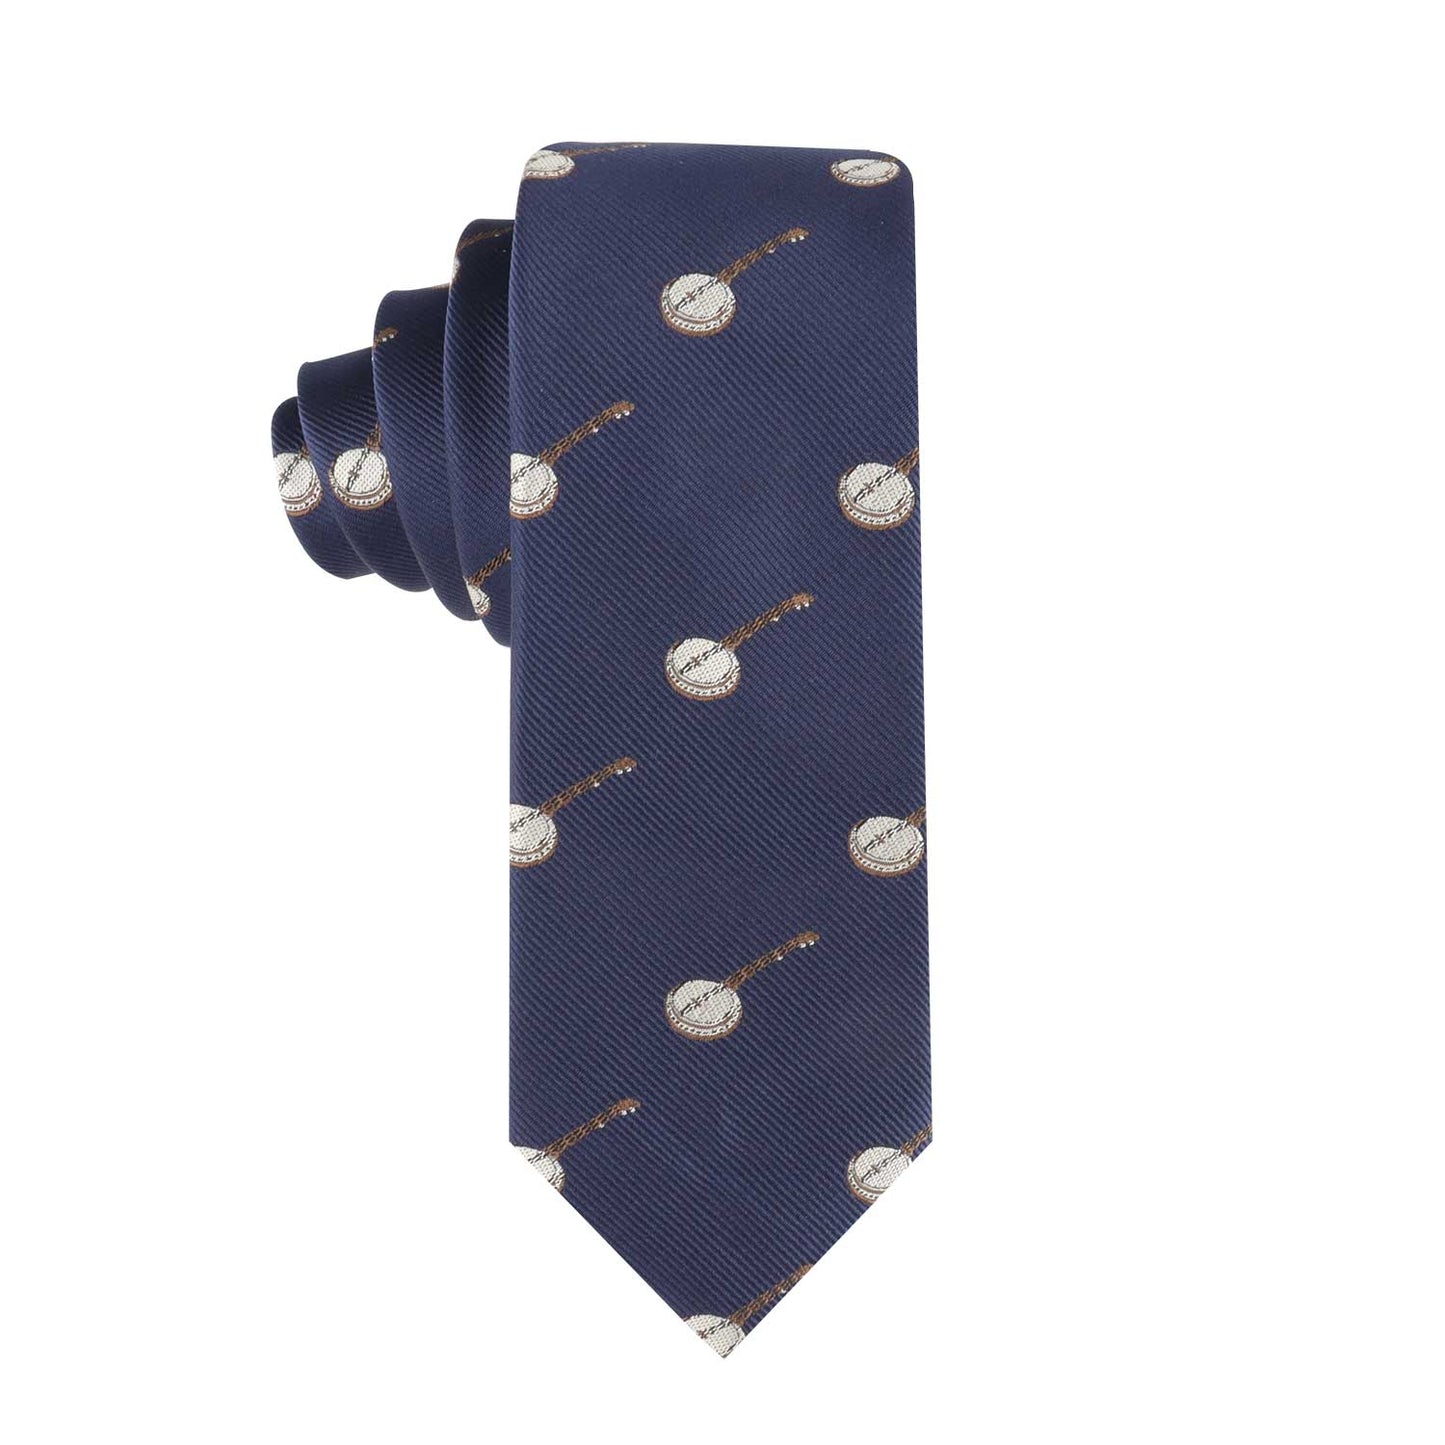 A **Banjo Skinny Tie** with a clock on it.